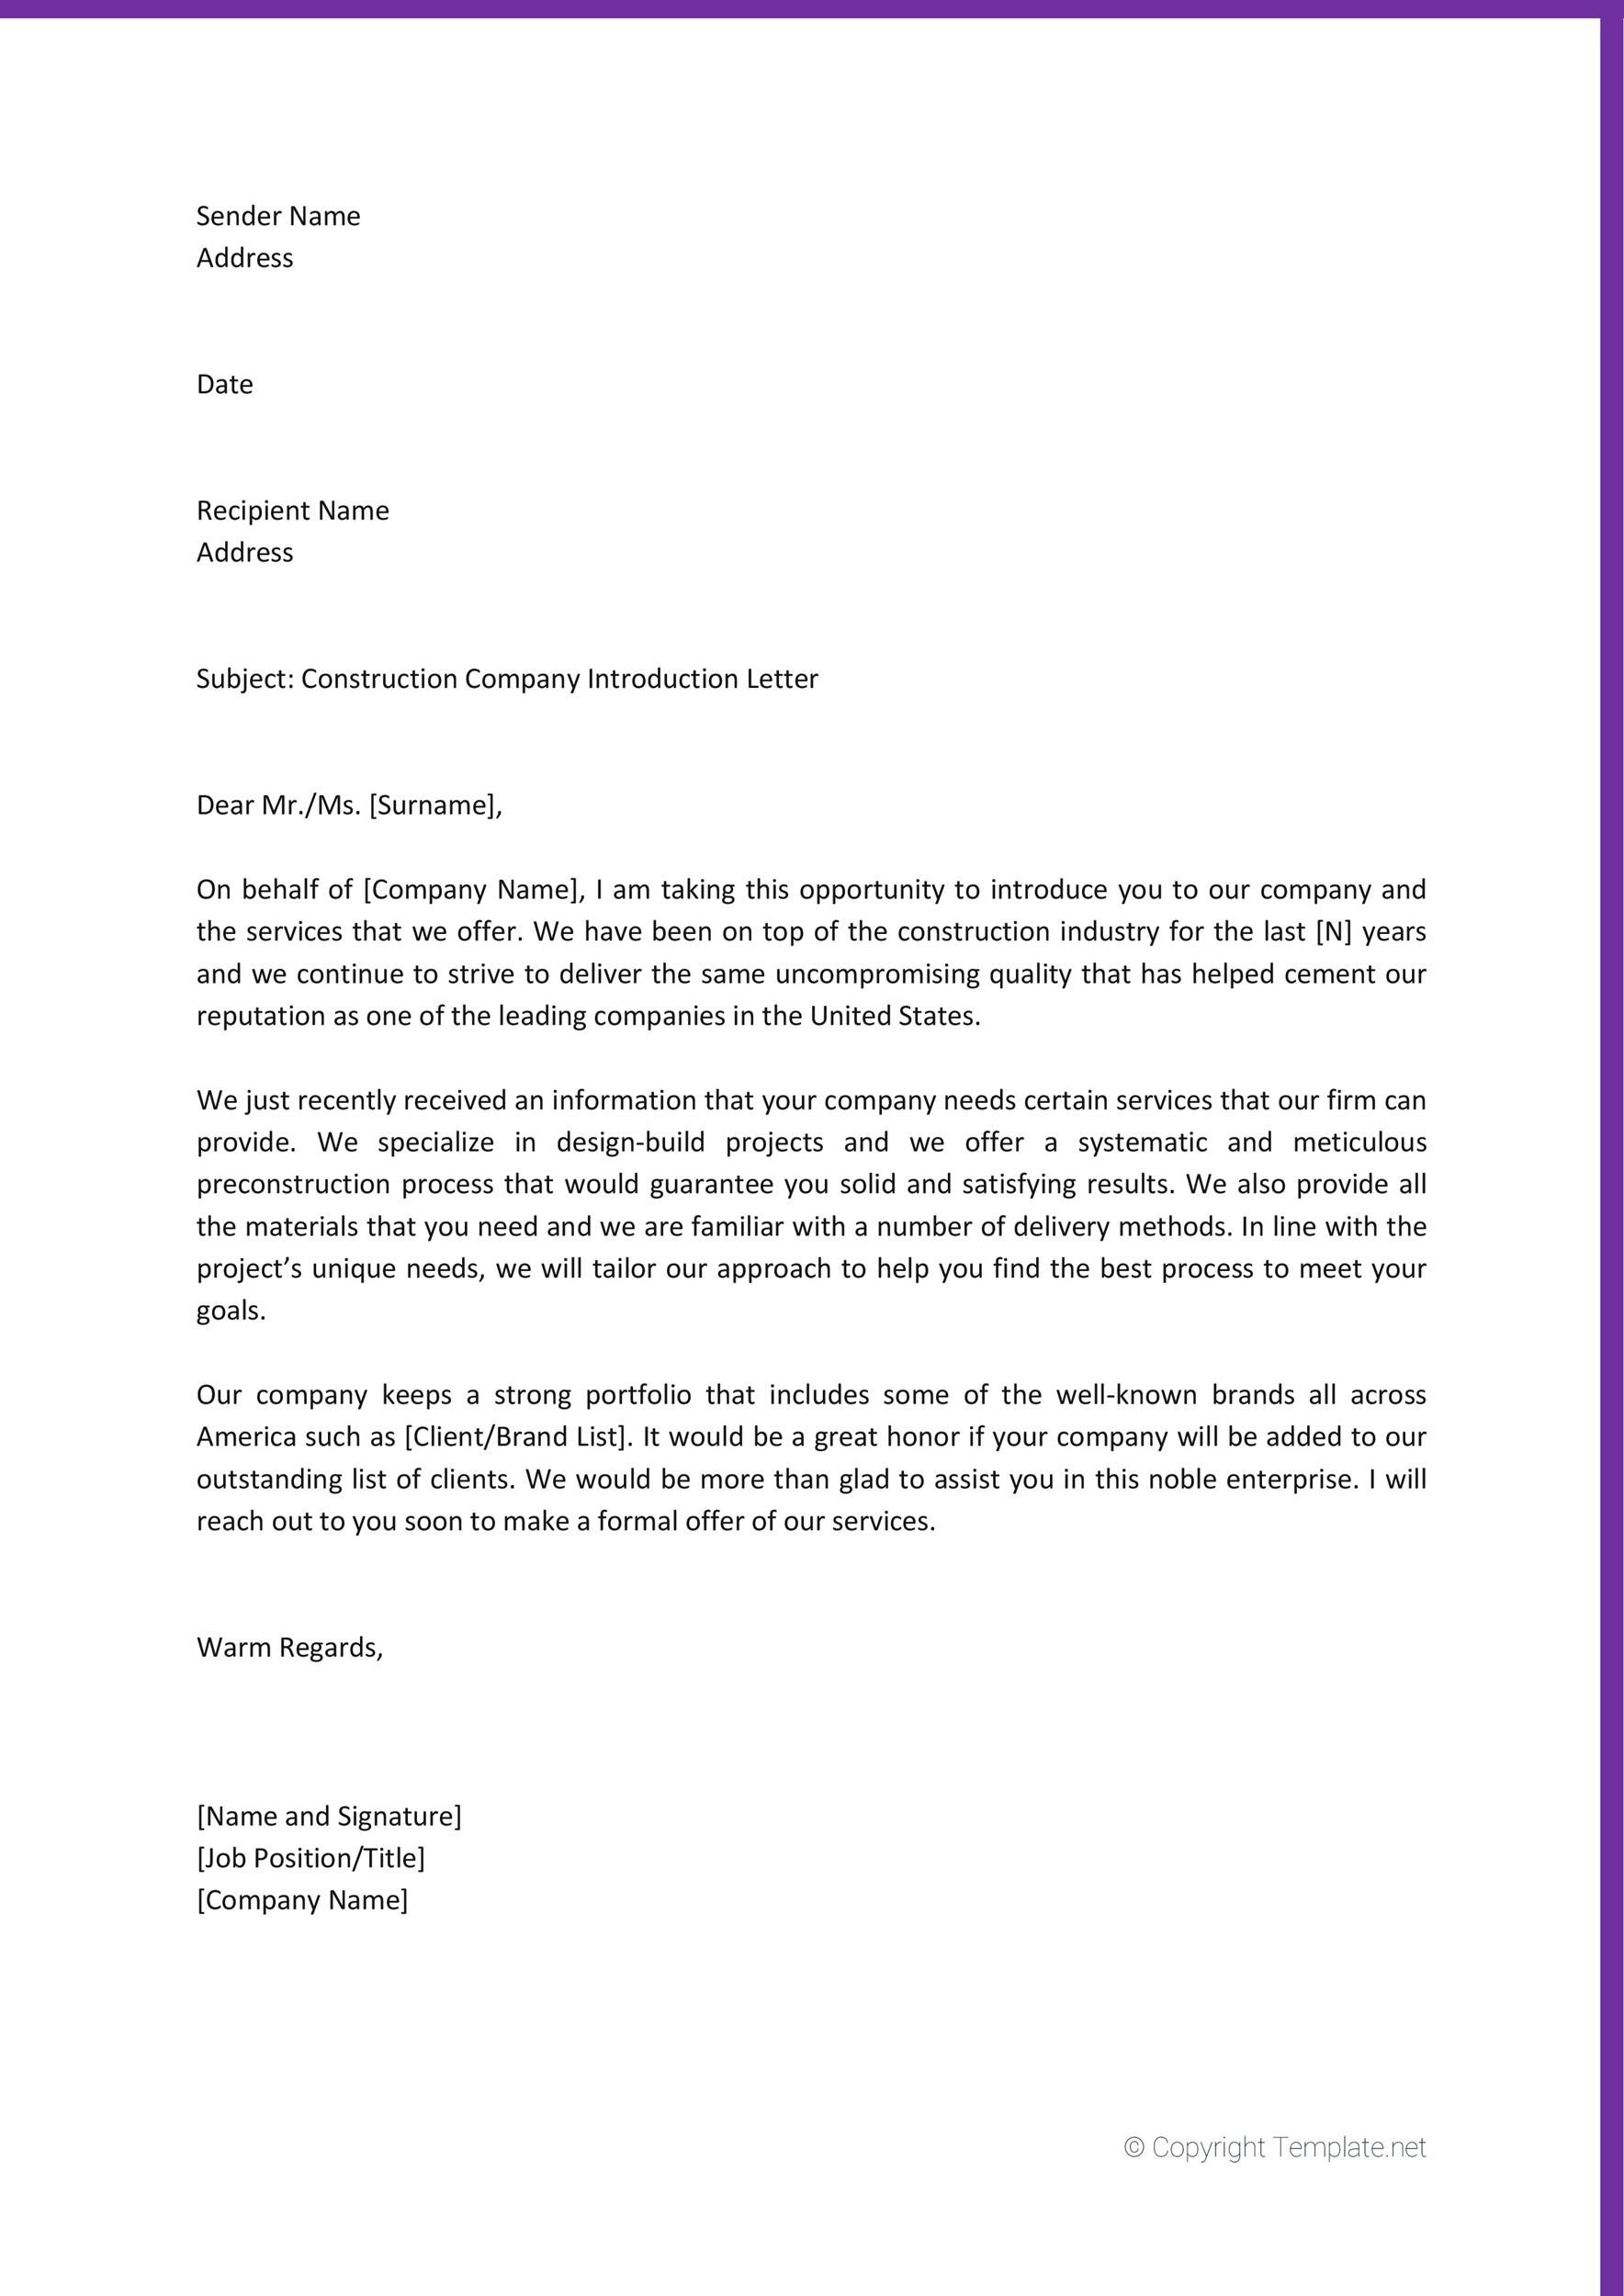 Construction Business Introduction Letter Sample | HQ Template Documents